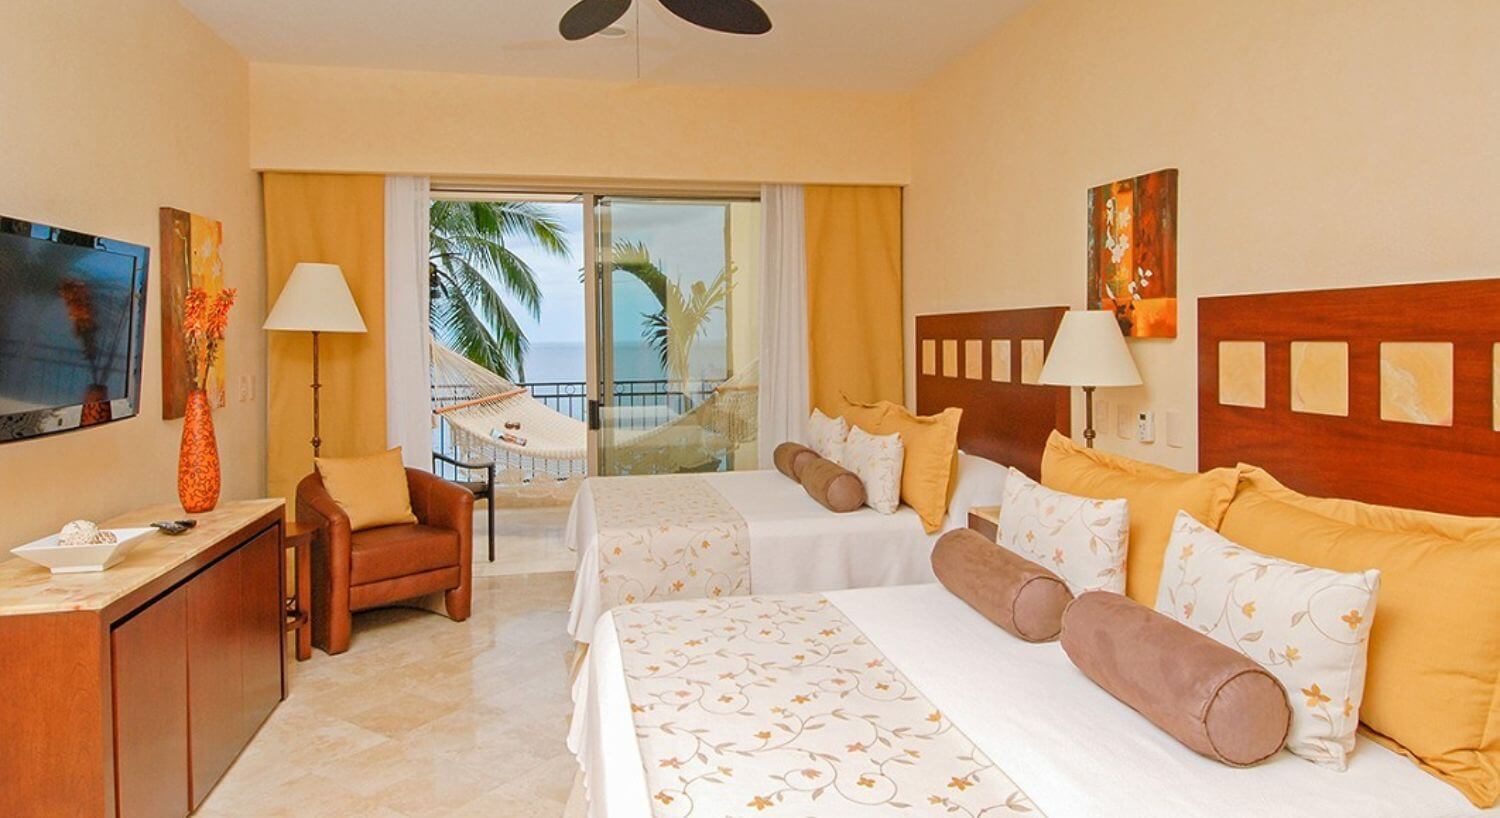 A bedroom with 2 queen beds with white and yellow bedding, a dresser and flat screen TV on the opposite wall, a plush leather armchair in the corner, and sliding glass doors leading out to a private balcony with oversized hammock, palm trees and ocean views.